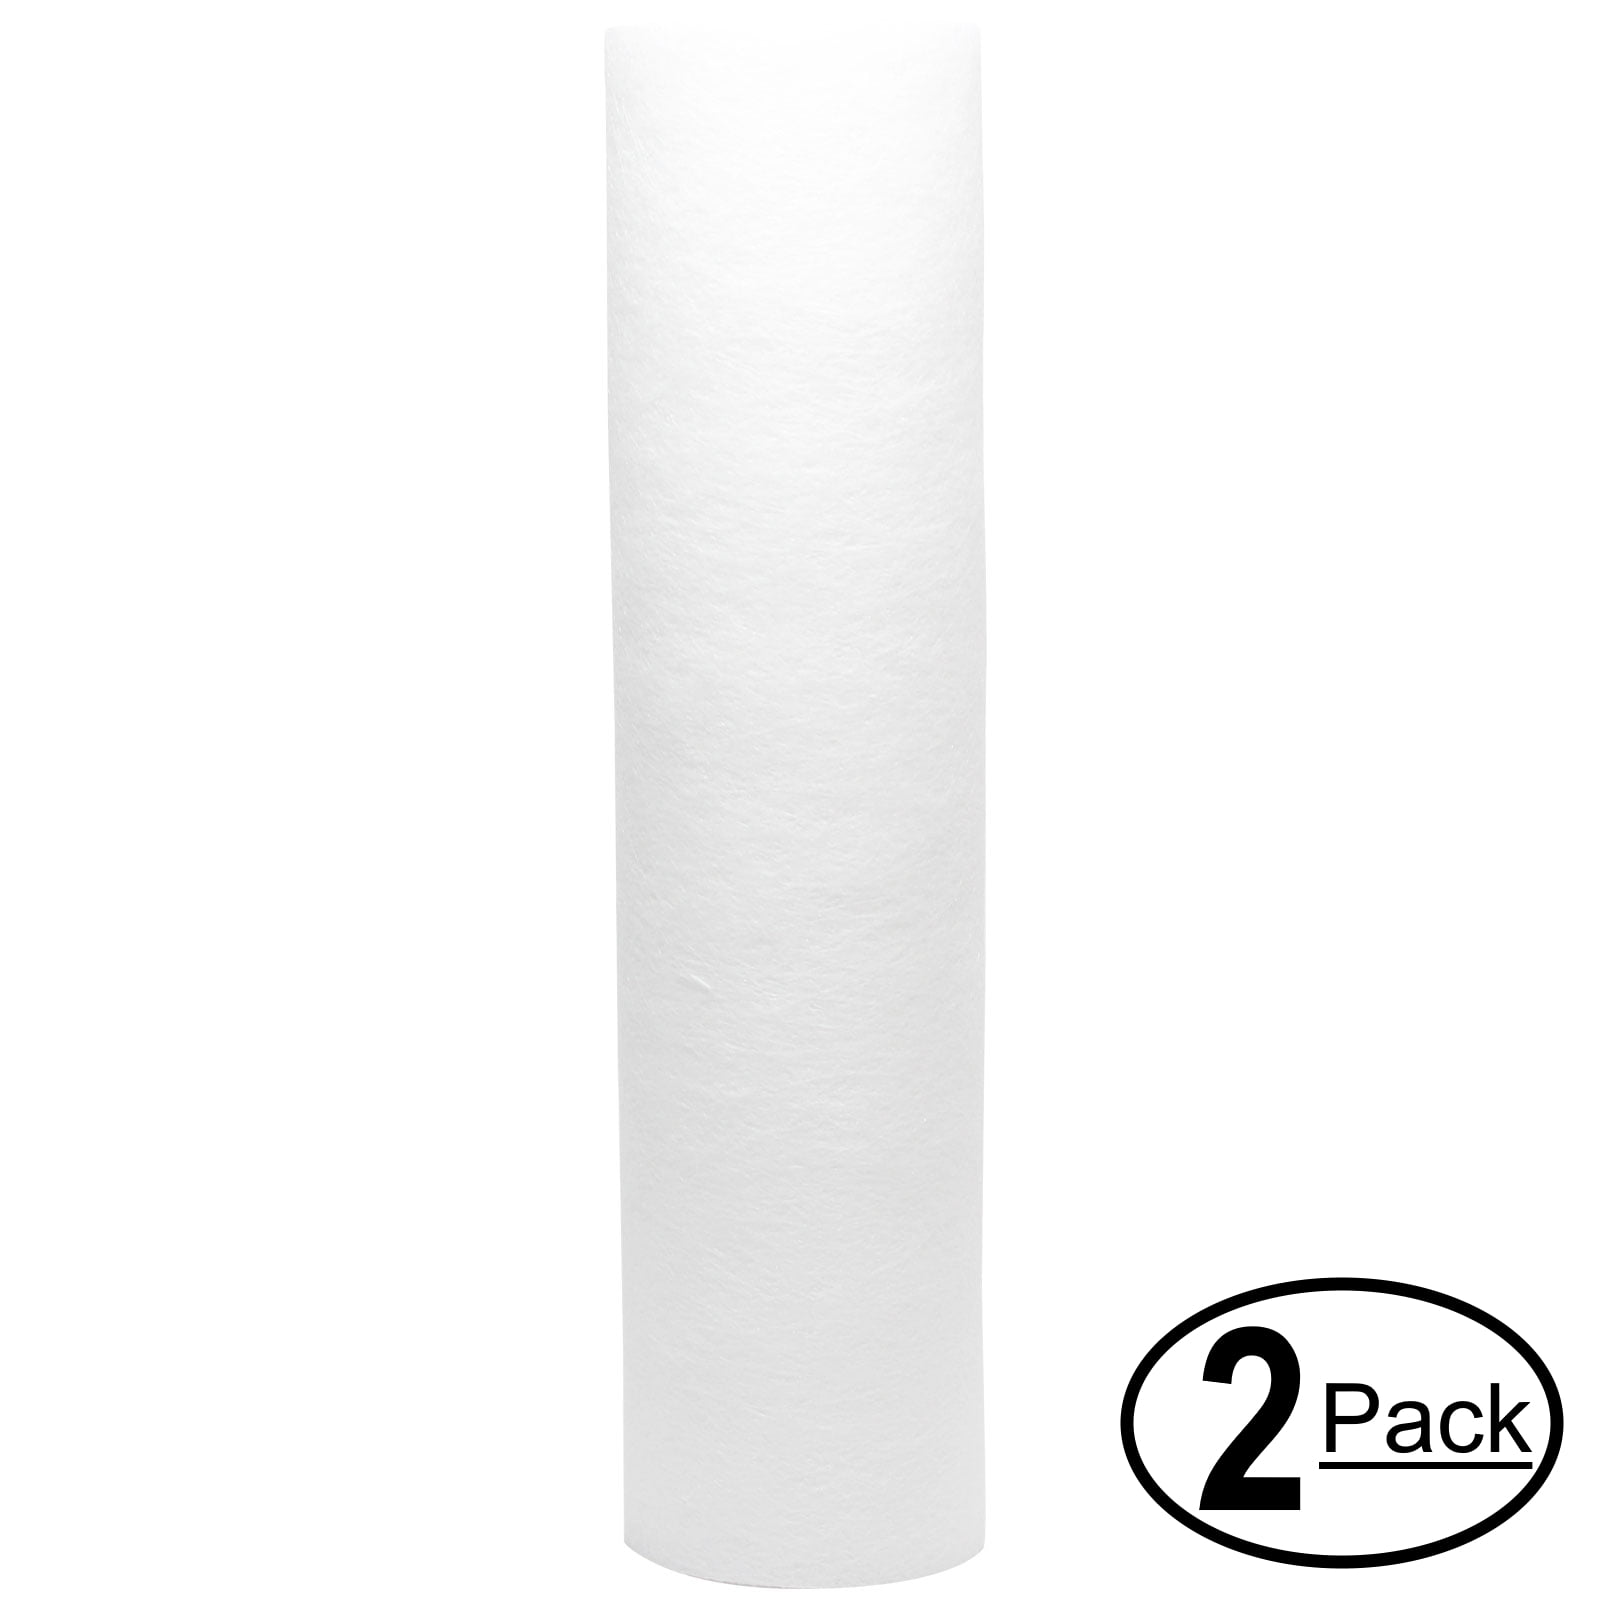 Includes Carbon Block Filter & PP Sediment Filter Denali Pure Brand 2-Pack Replacement Filter Kit Compatible with Glacier Bay HDGUSS4 RO System 